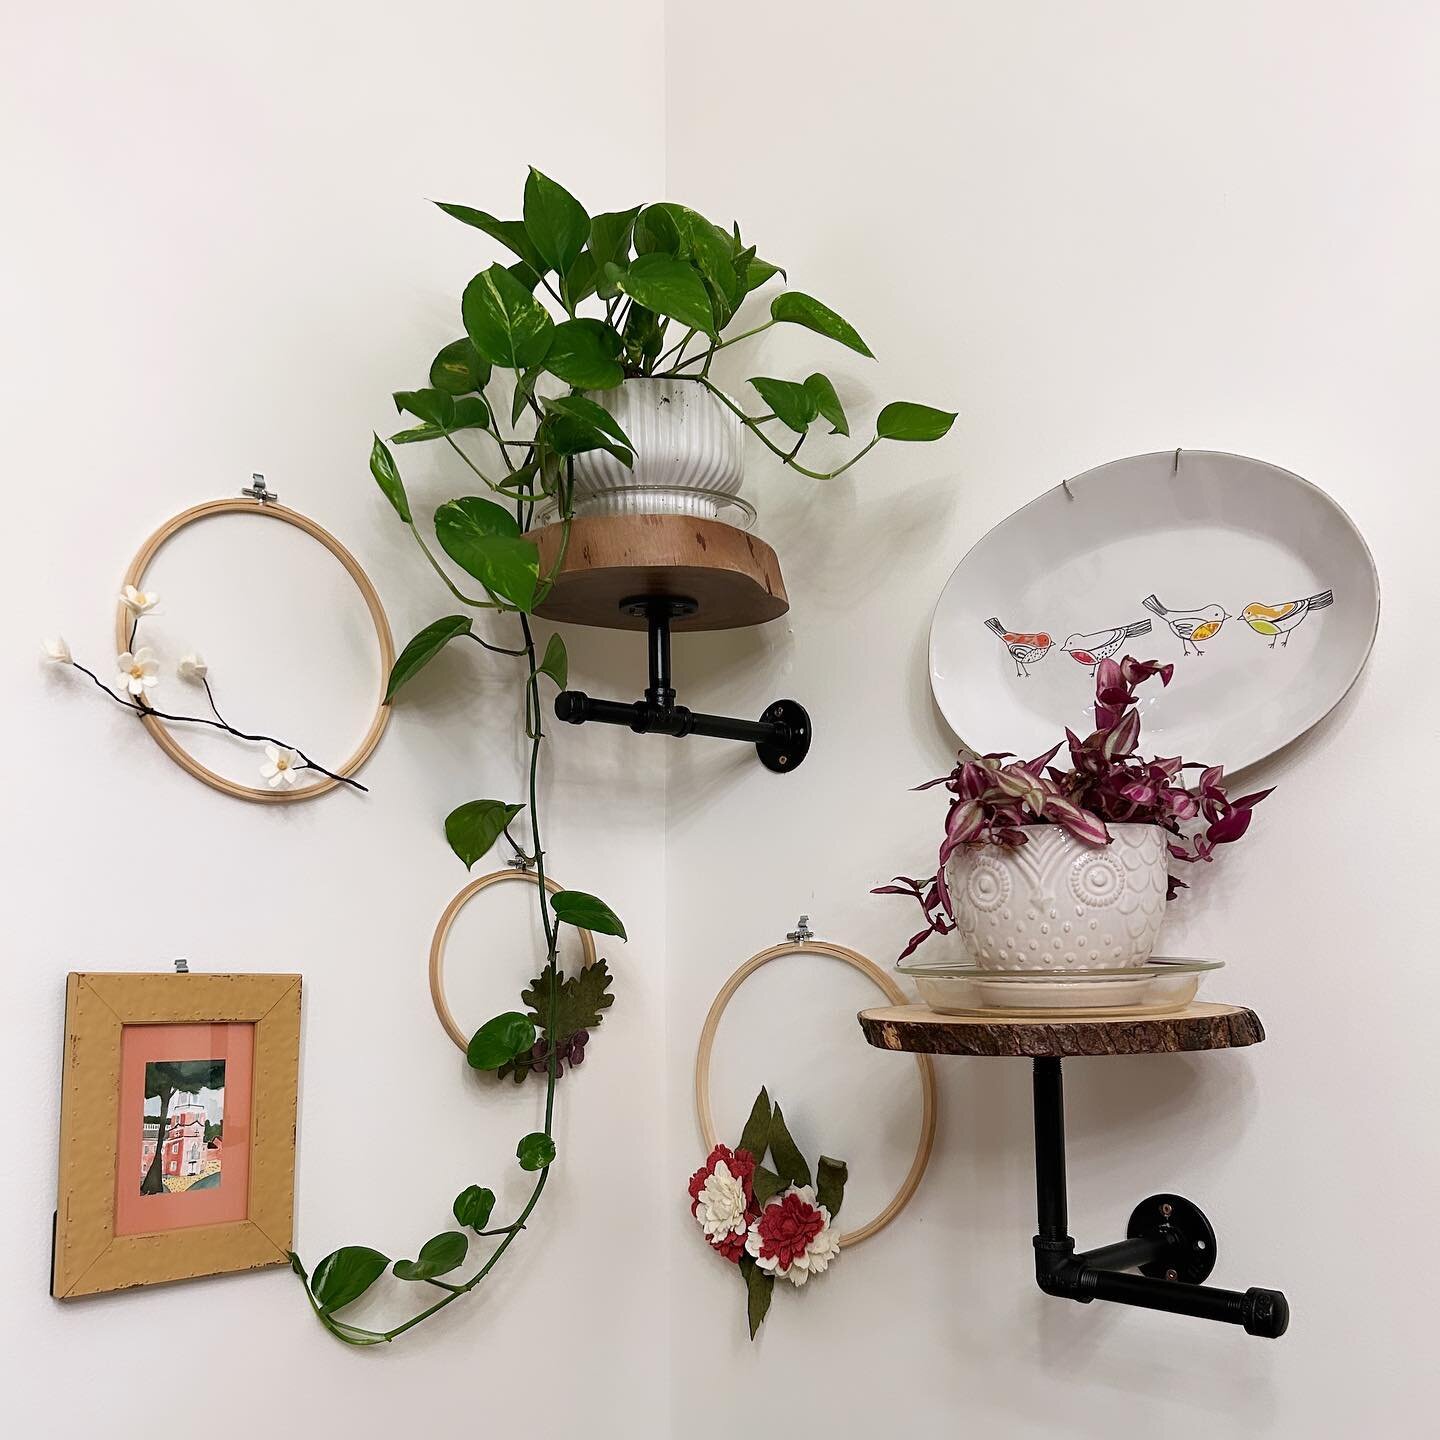 We love recycling old belongings into something useful! Pipe fittings + old cutting boards/wooden stands = gorgeous plant stands that keep them safe from 🐱🐱. #diy #reclaimed